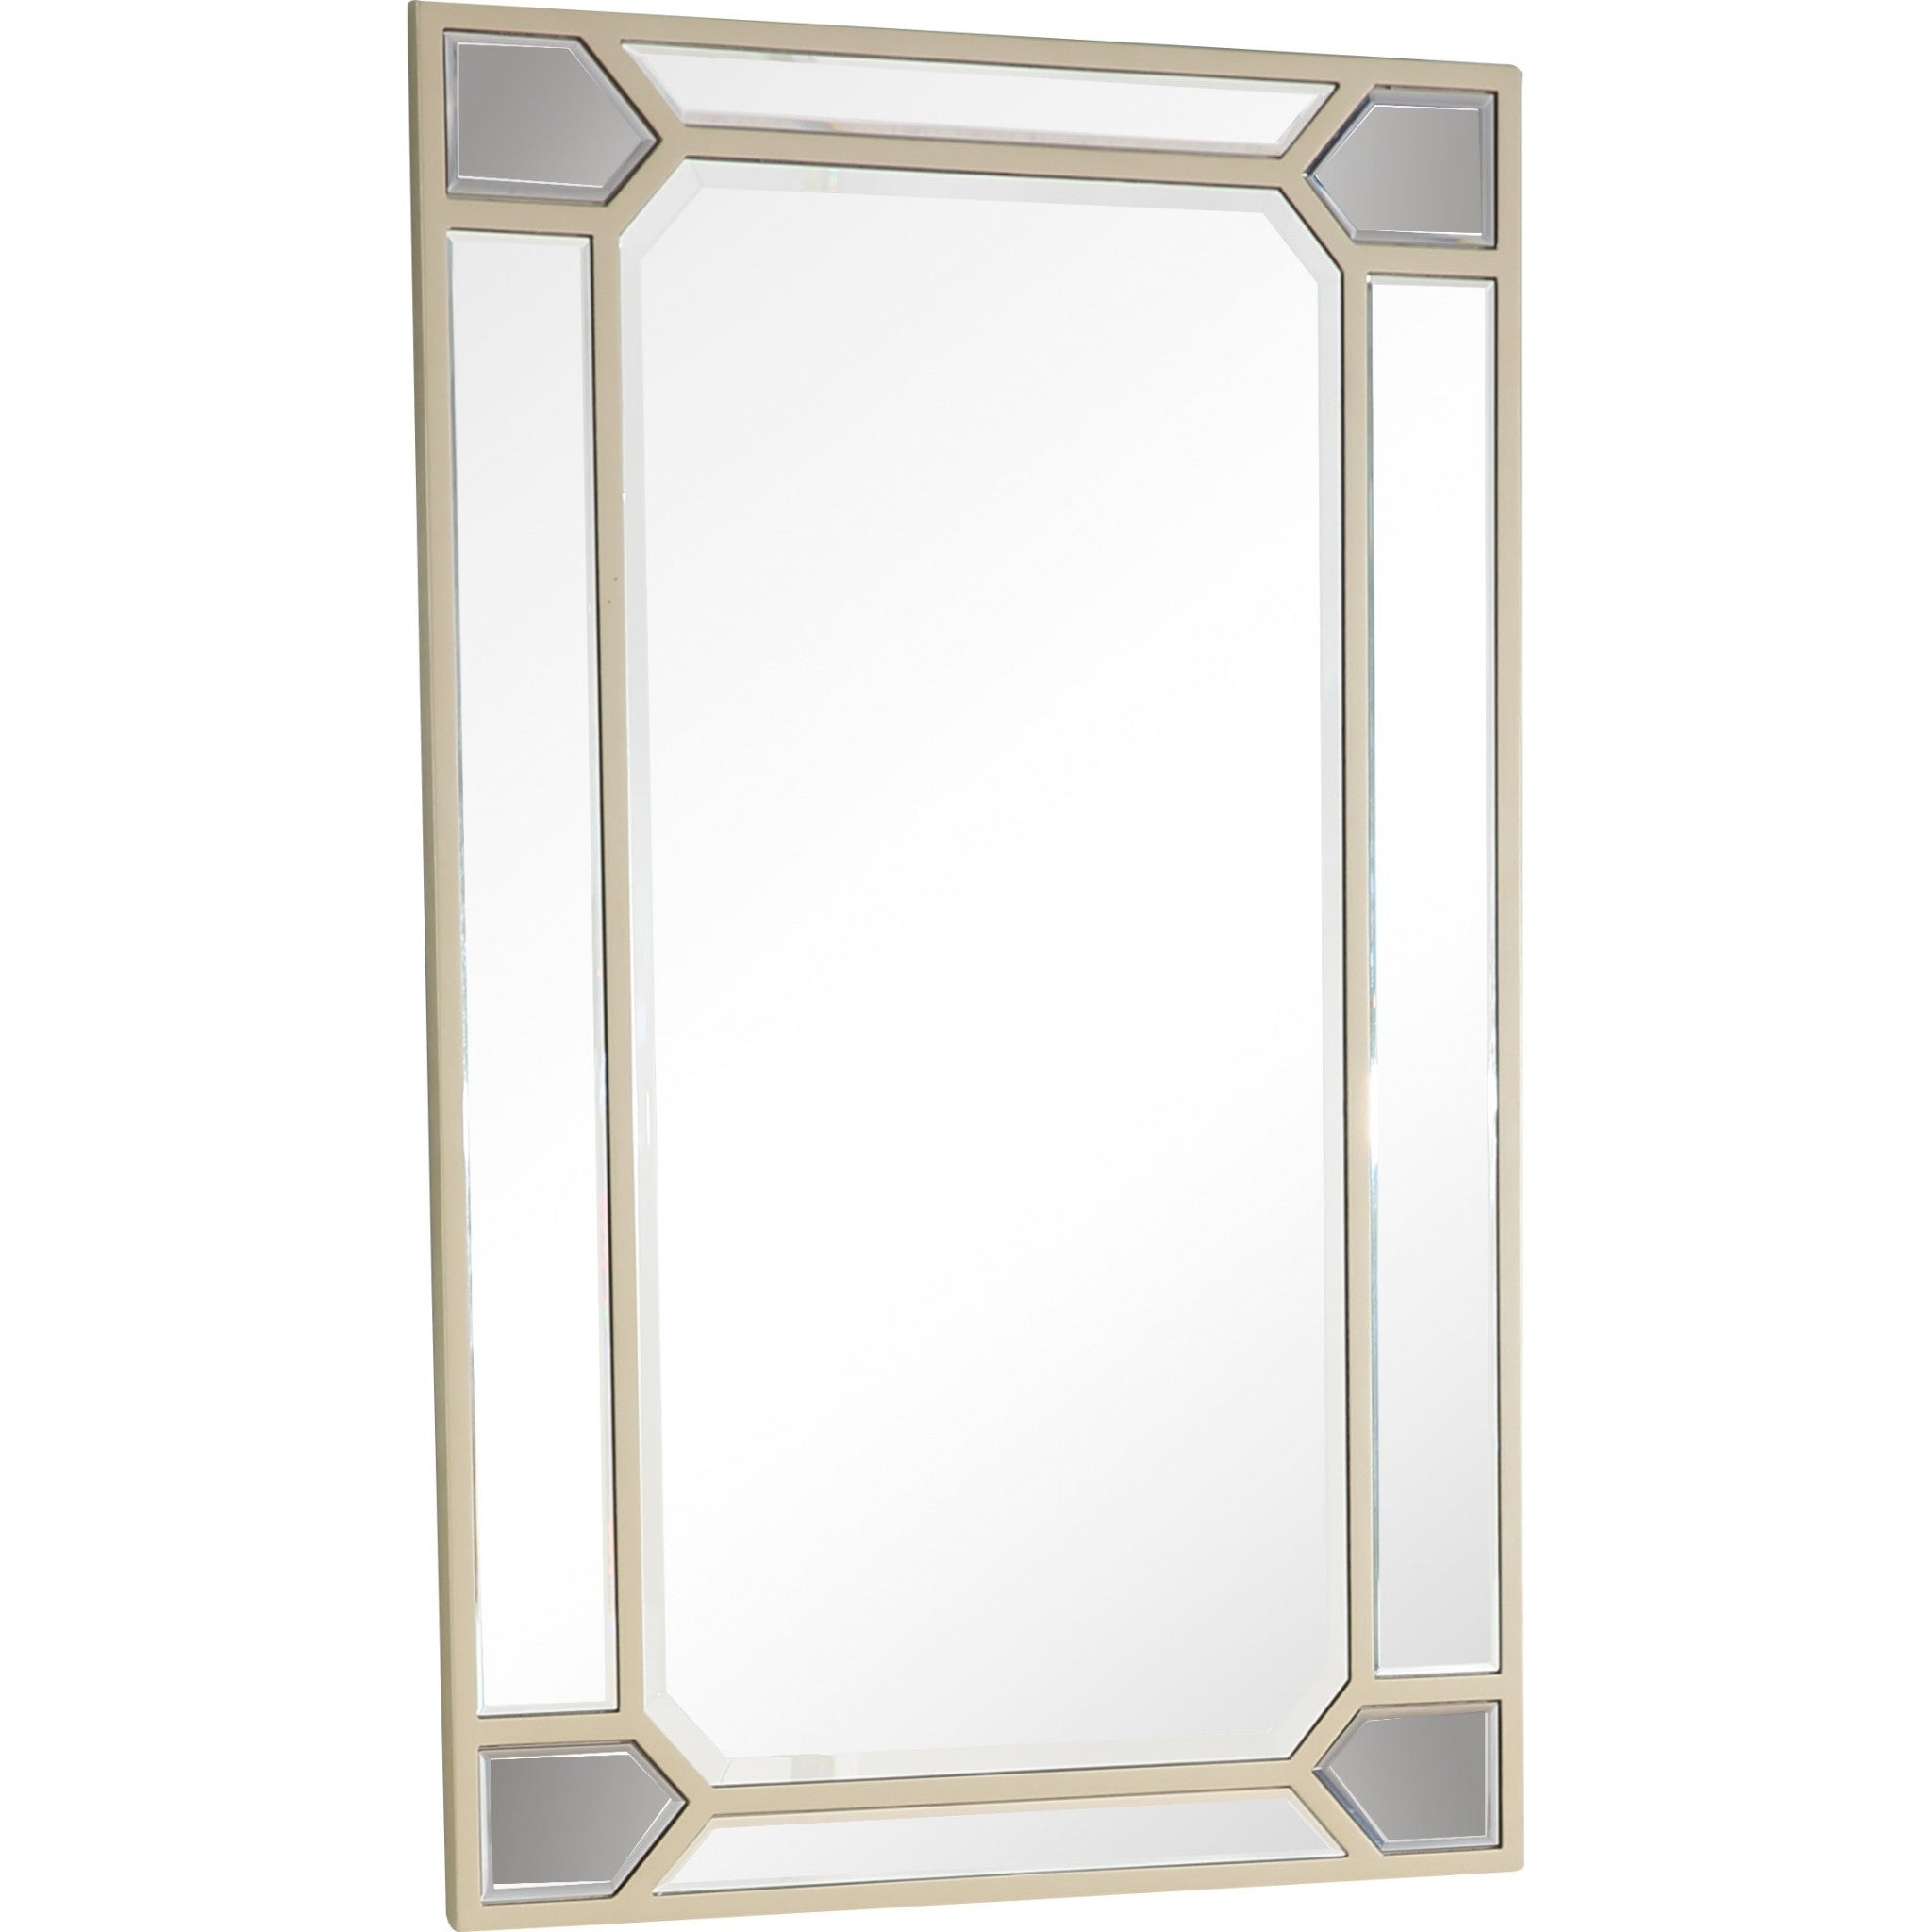 43" Silver Metal Framed Accent Mirror